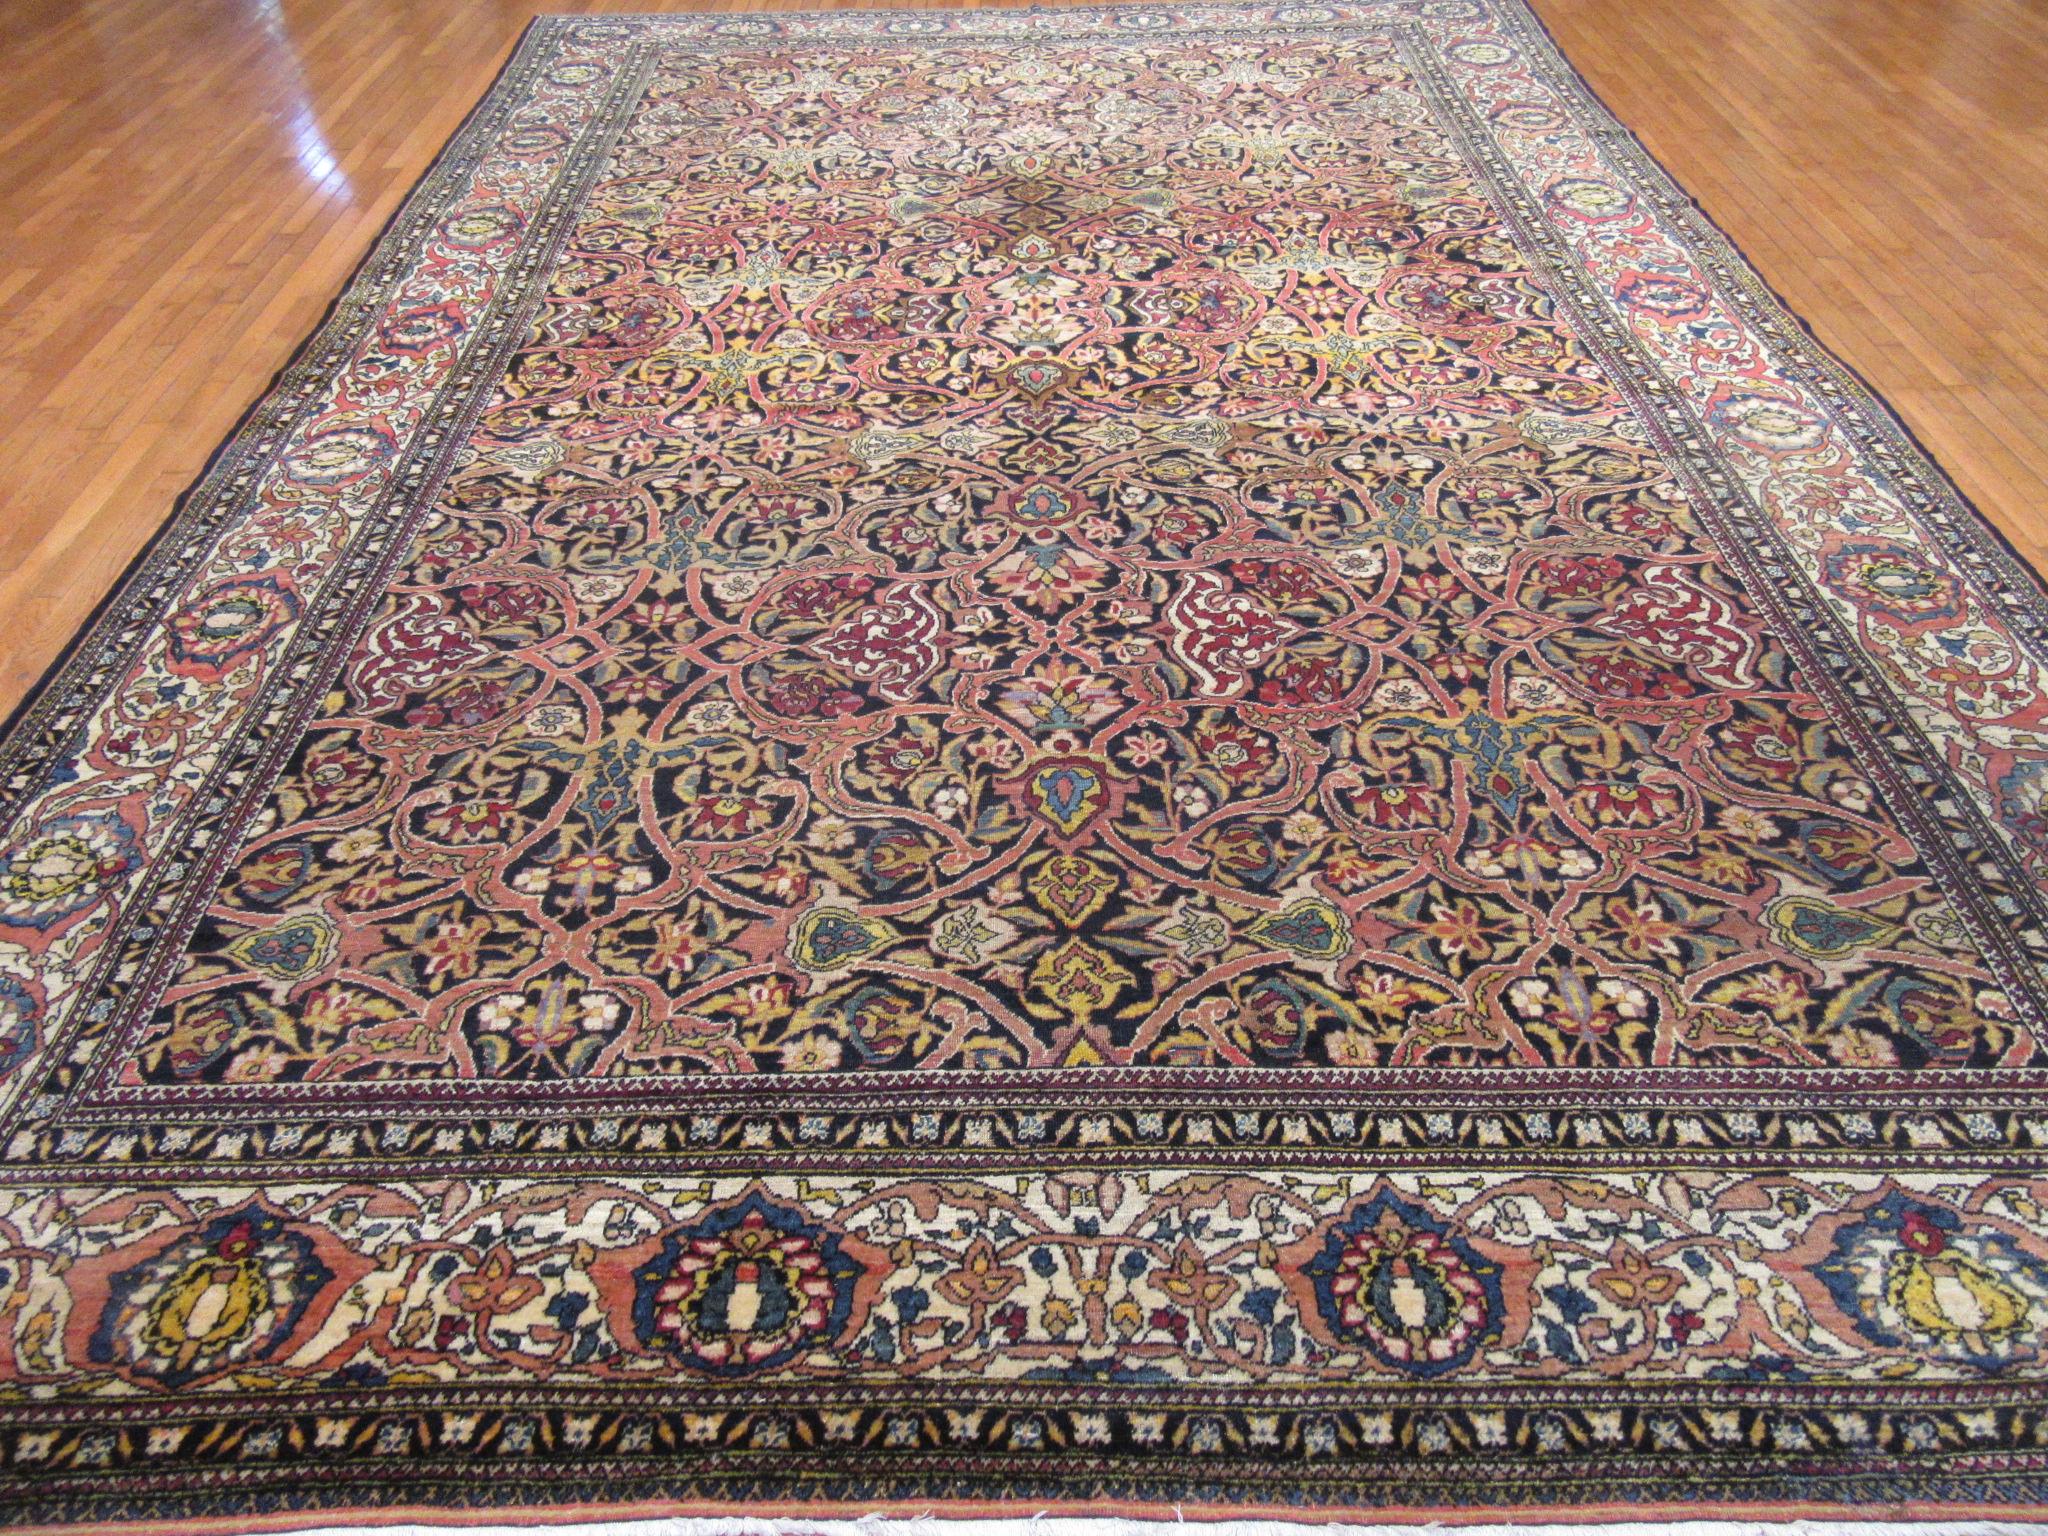 This is an antique hand knotted Persian rug from the infamous city of Isfahan. It is made with wool on cotton foundation with a typical fine weave from this region. The rug has an all-over seventeenth century Eslimi design on a dark navy color